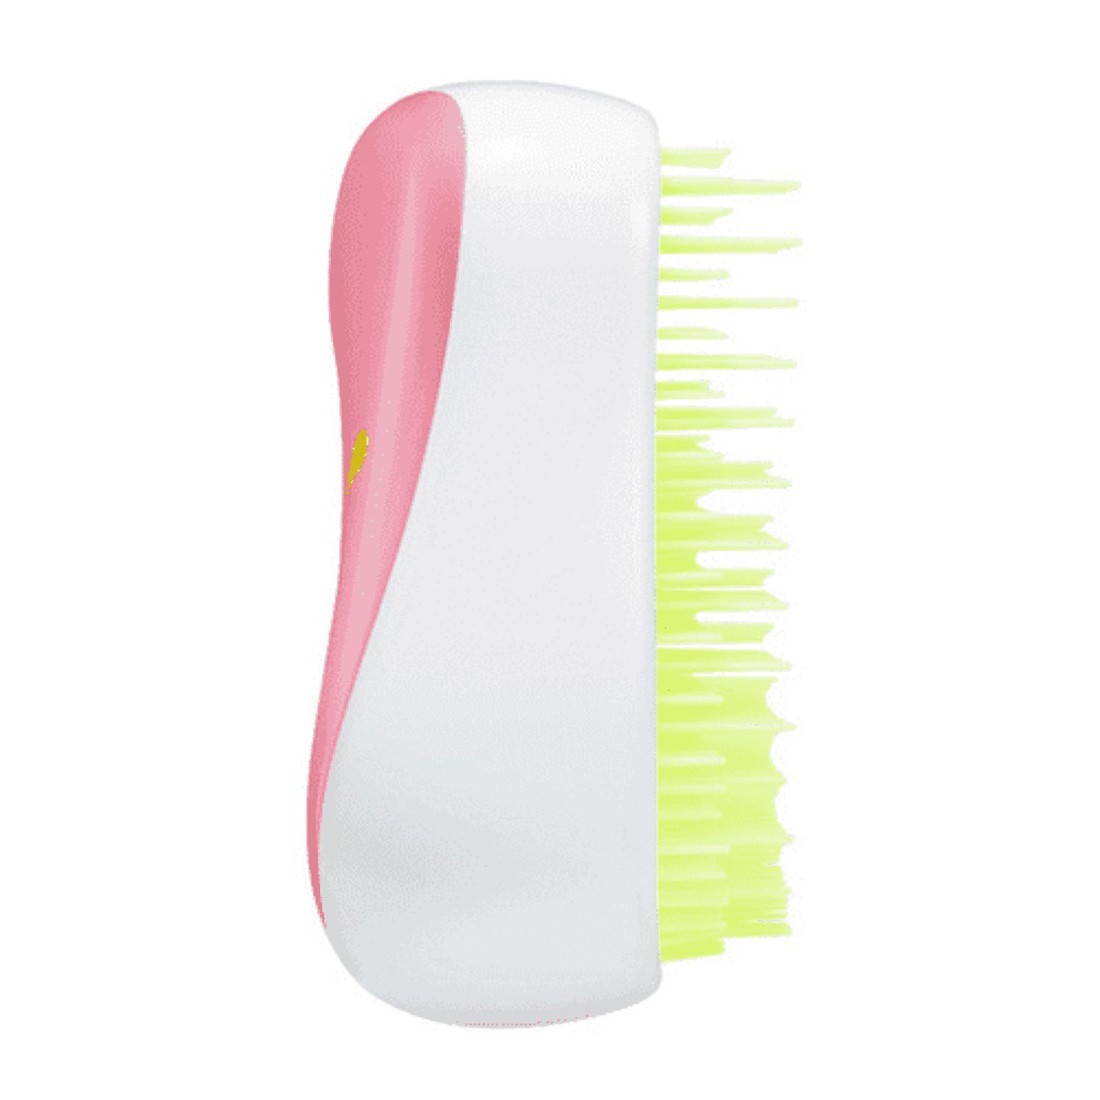 Buy Tangle Teezer Compact Styler Puma - White - Tangle Teezer, delivered to  your home | TheOutfit